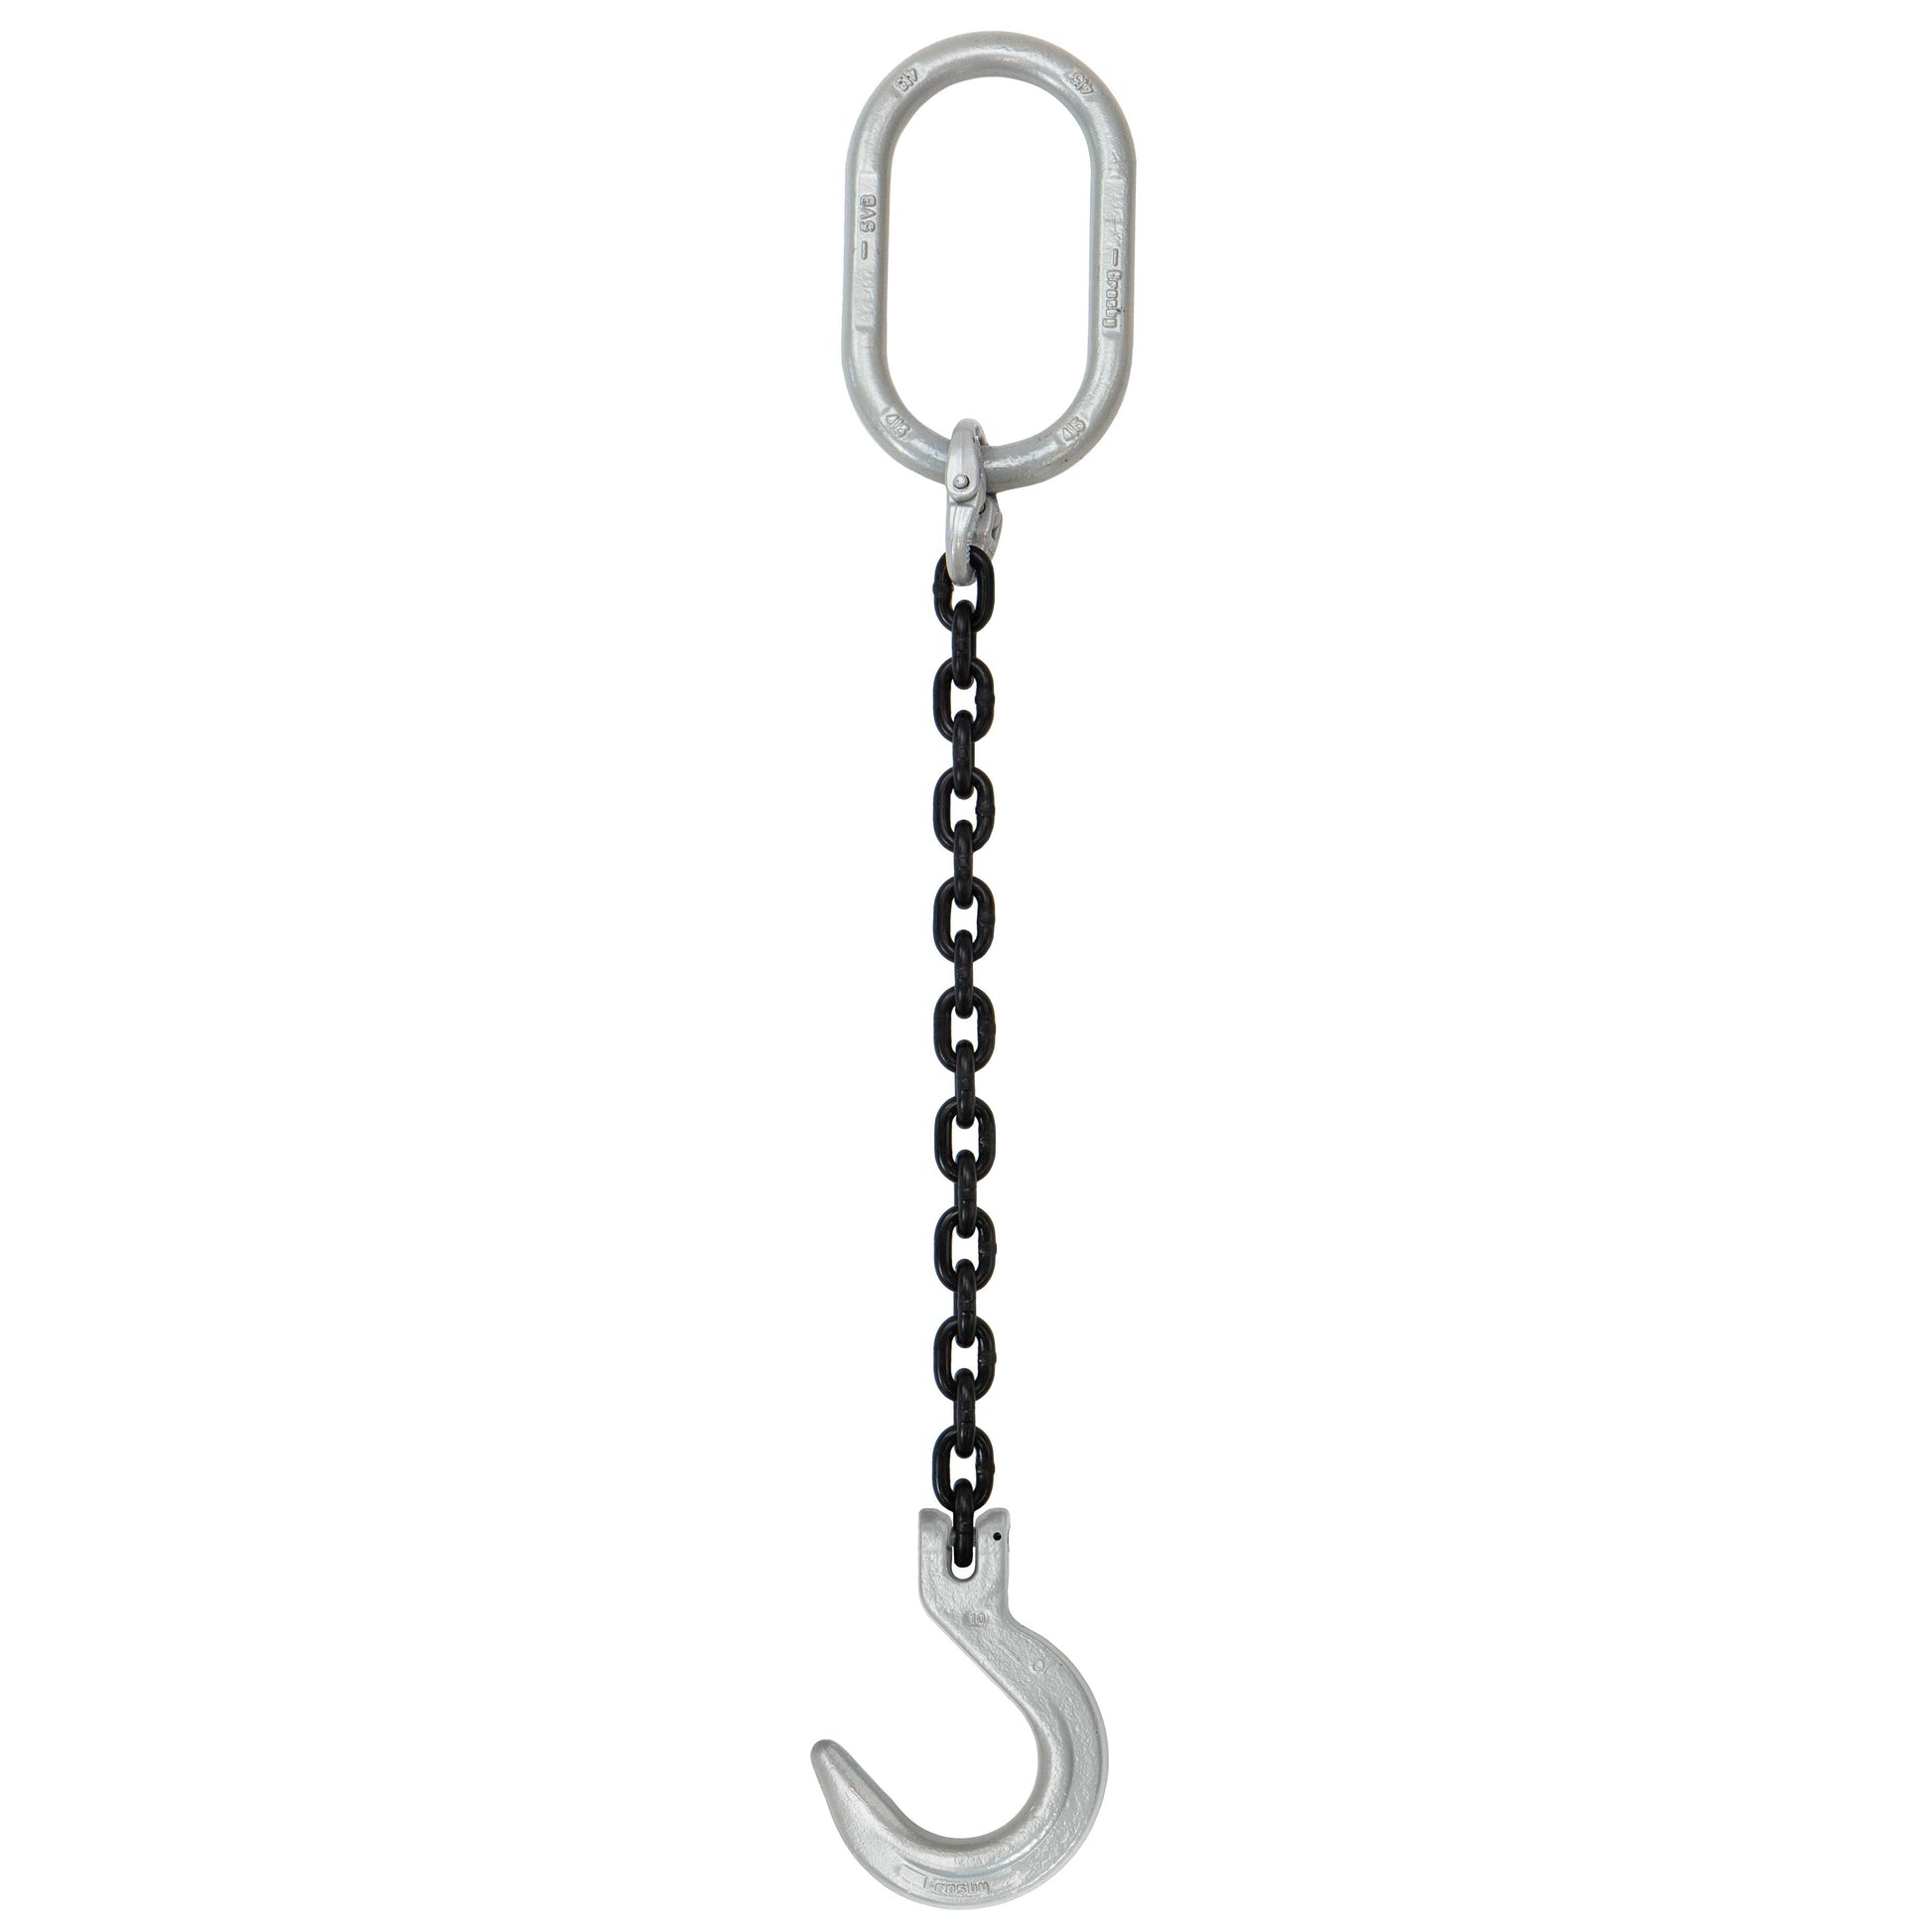 932 inch x 4 foot Domestic Single Leg Chain Sling w Crosby Foundry Hook Grade 100 image 1 of 2